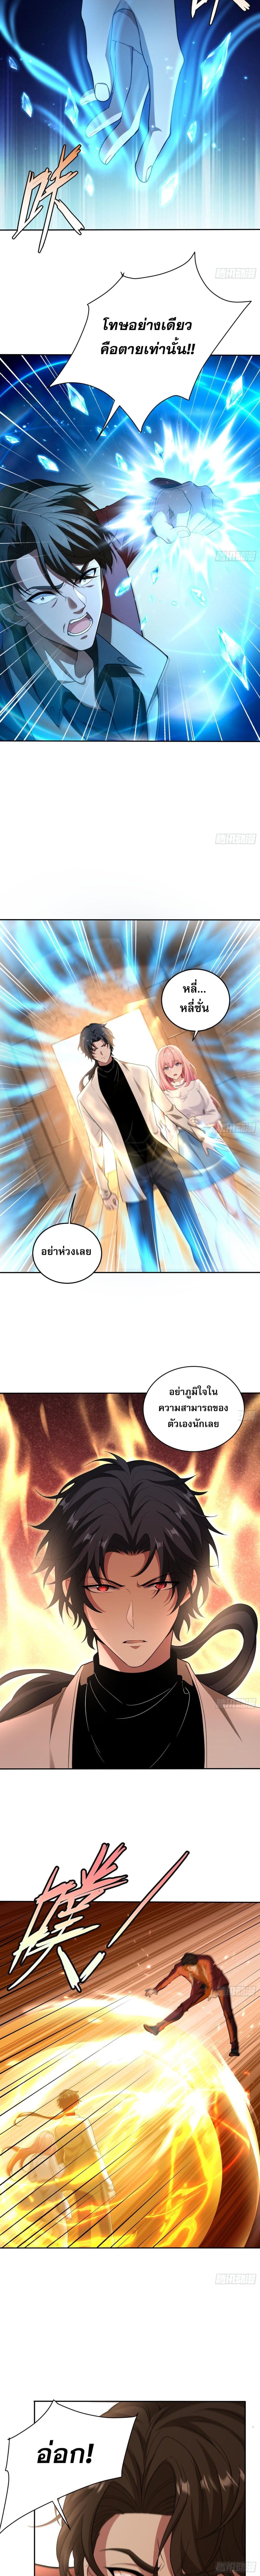 The All-Knowing Cultivator ผู้ฝึกตนผู้รอบรู้ 7/12